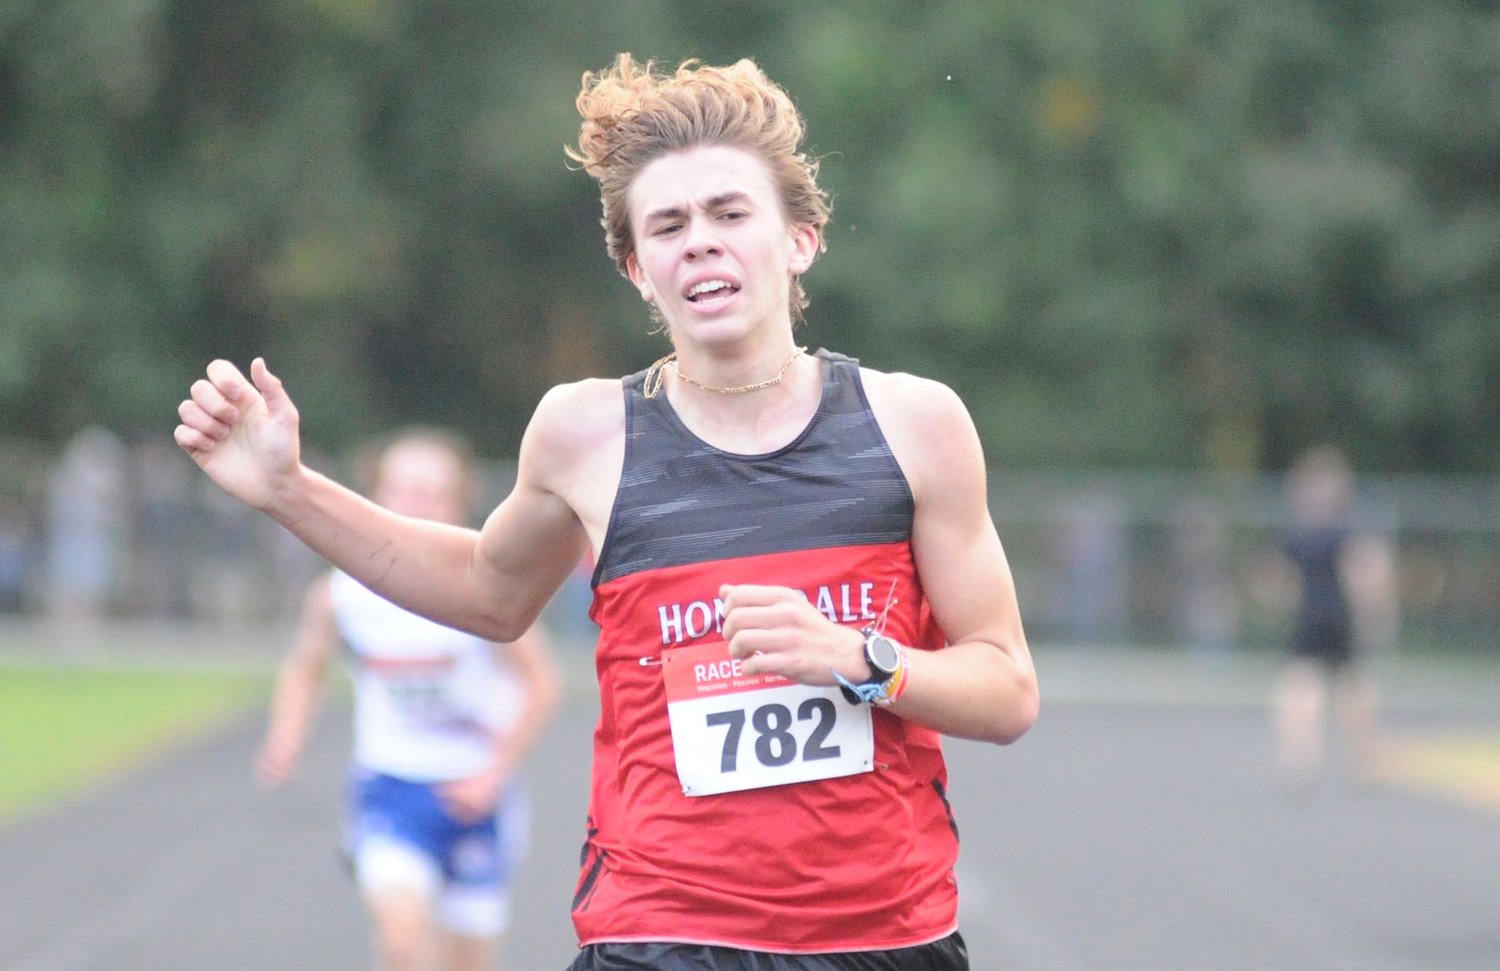 Honesdale’s Aidan LaTourette posted the winning time of 18:09.4 in the men’s 3.1-mile varsity race.